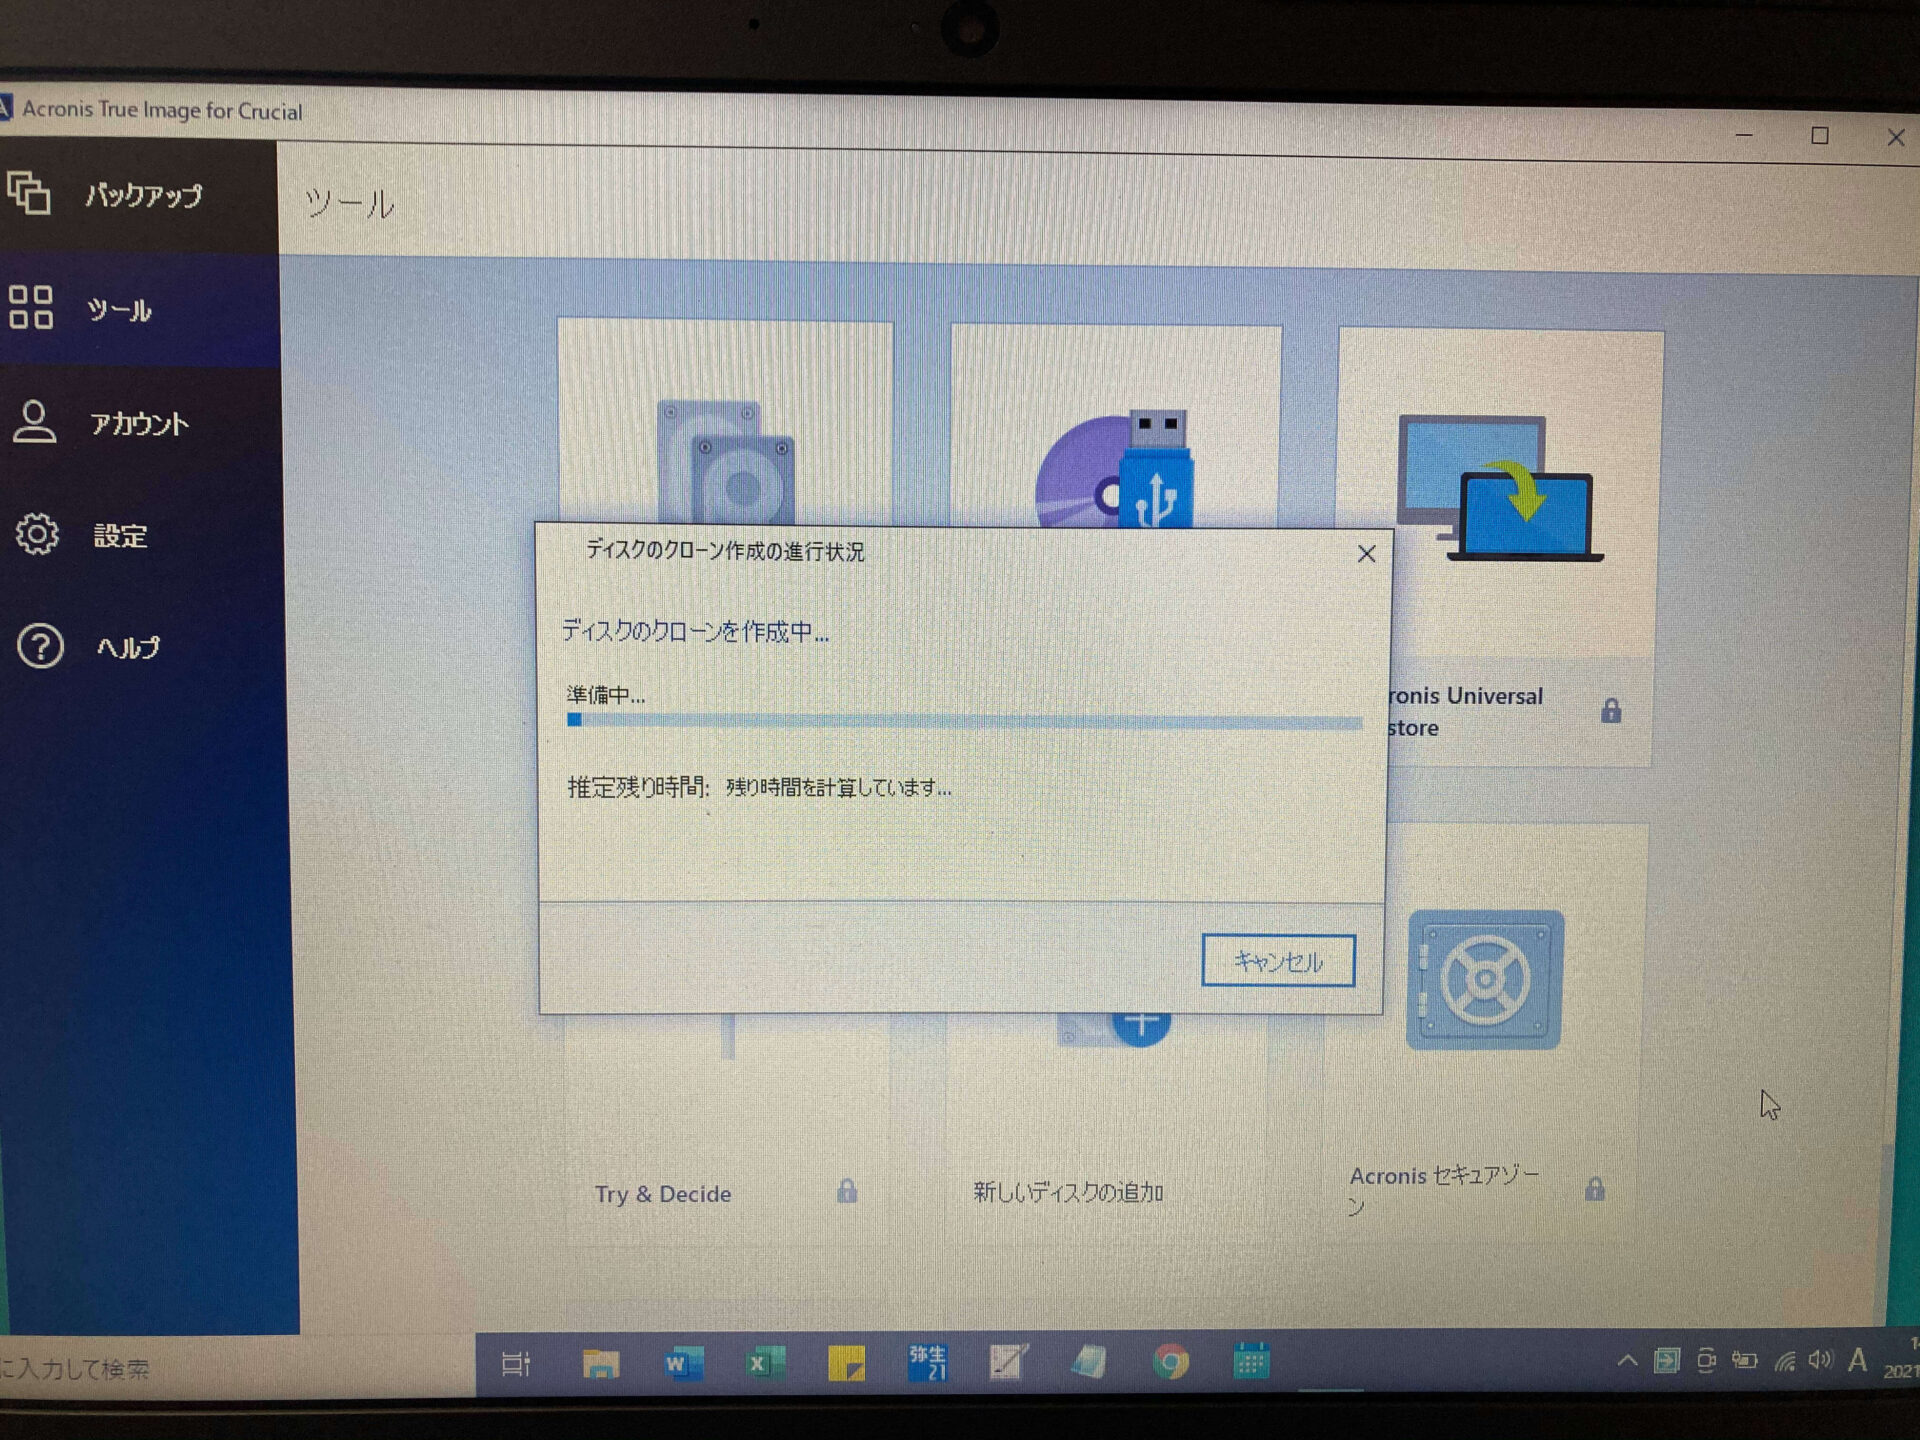 acronis true image hd cloning hdd to ssd laptop